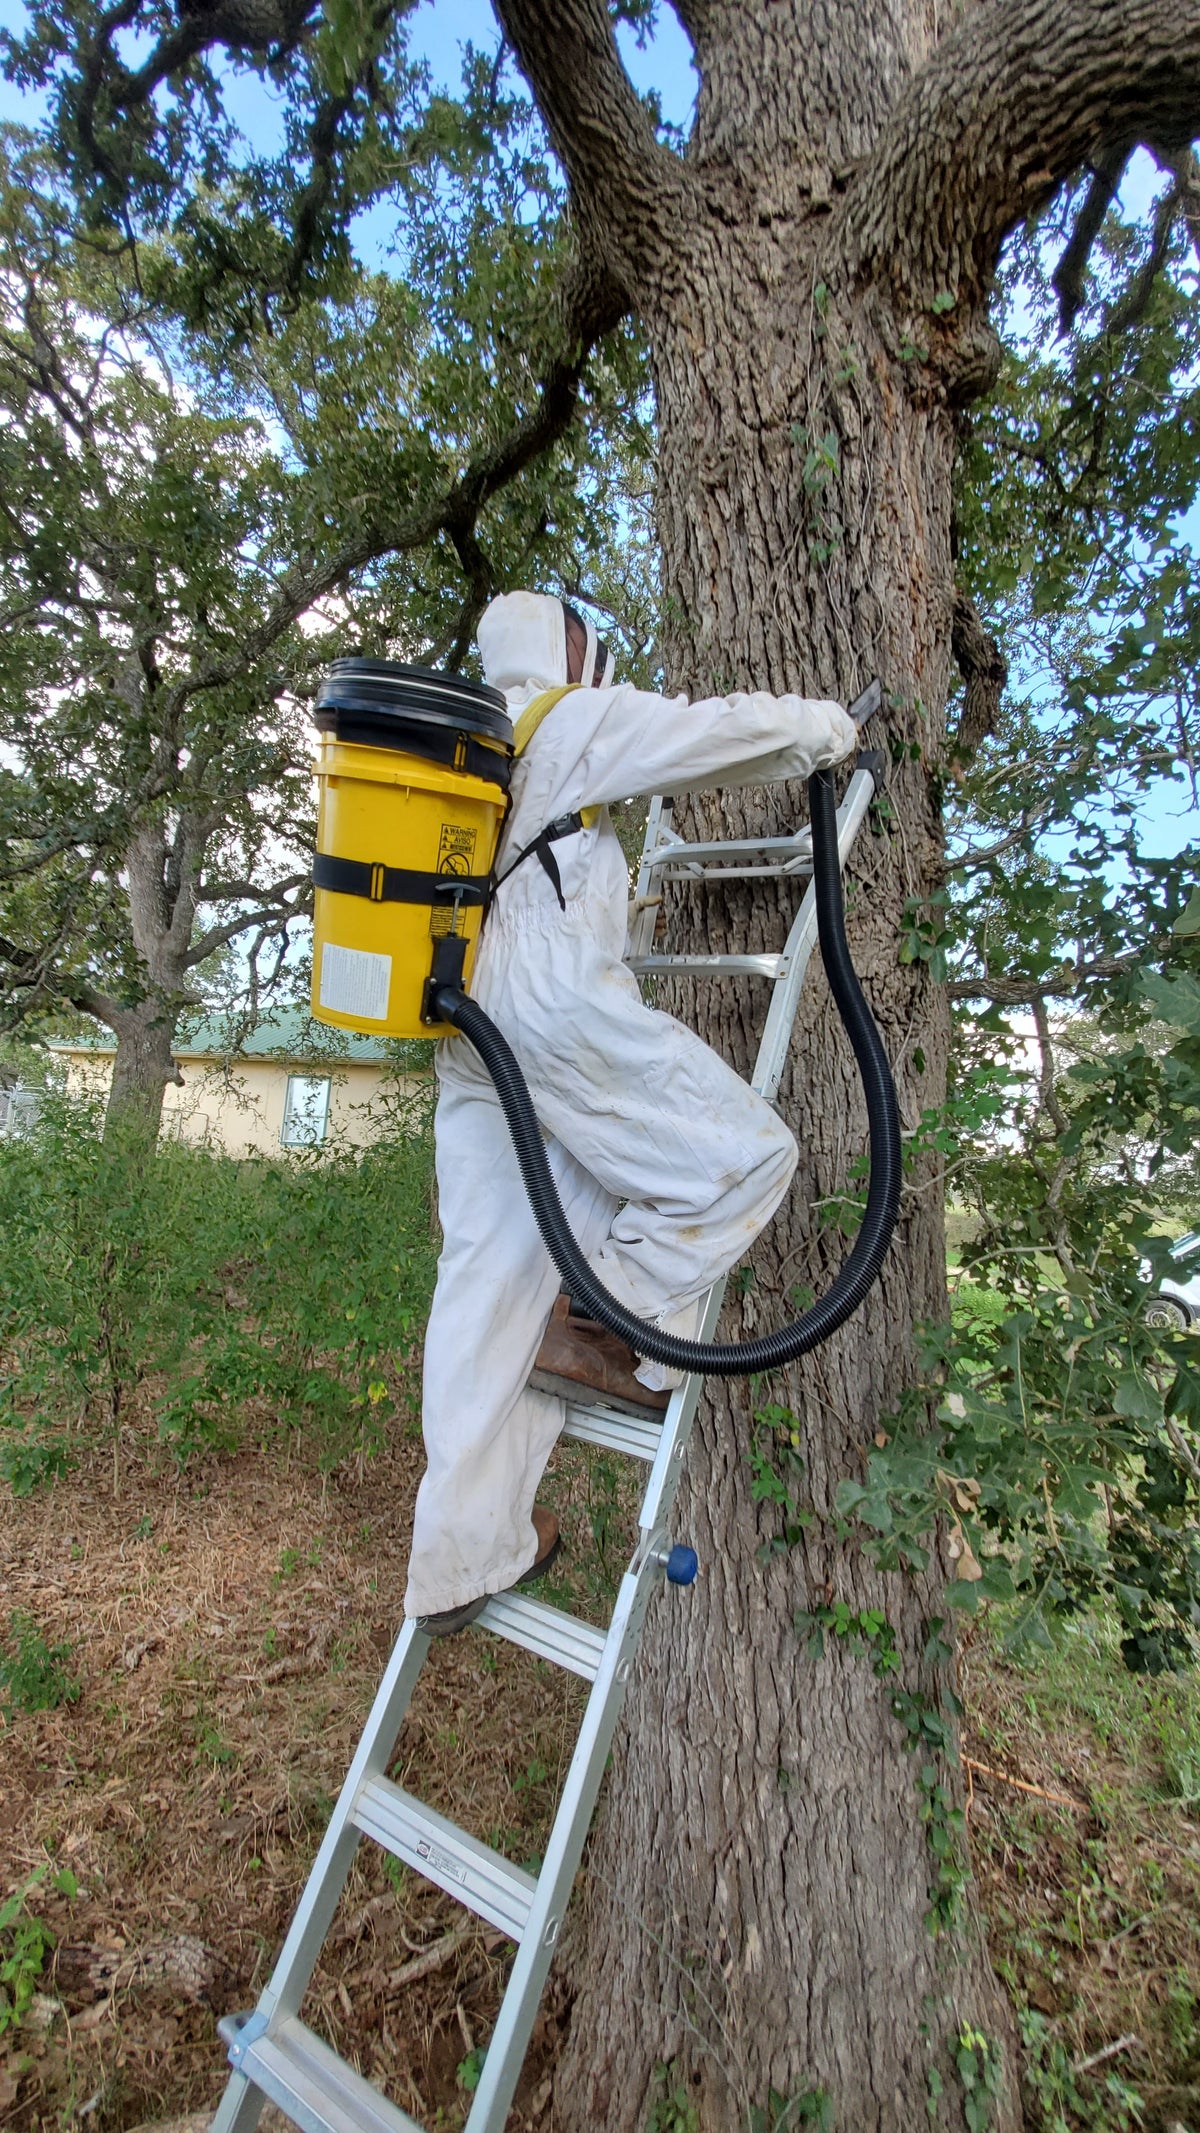 Bee Vacuum - Go Getter Everything